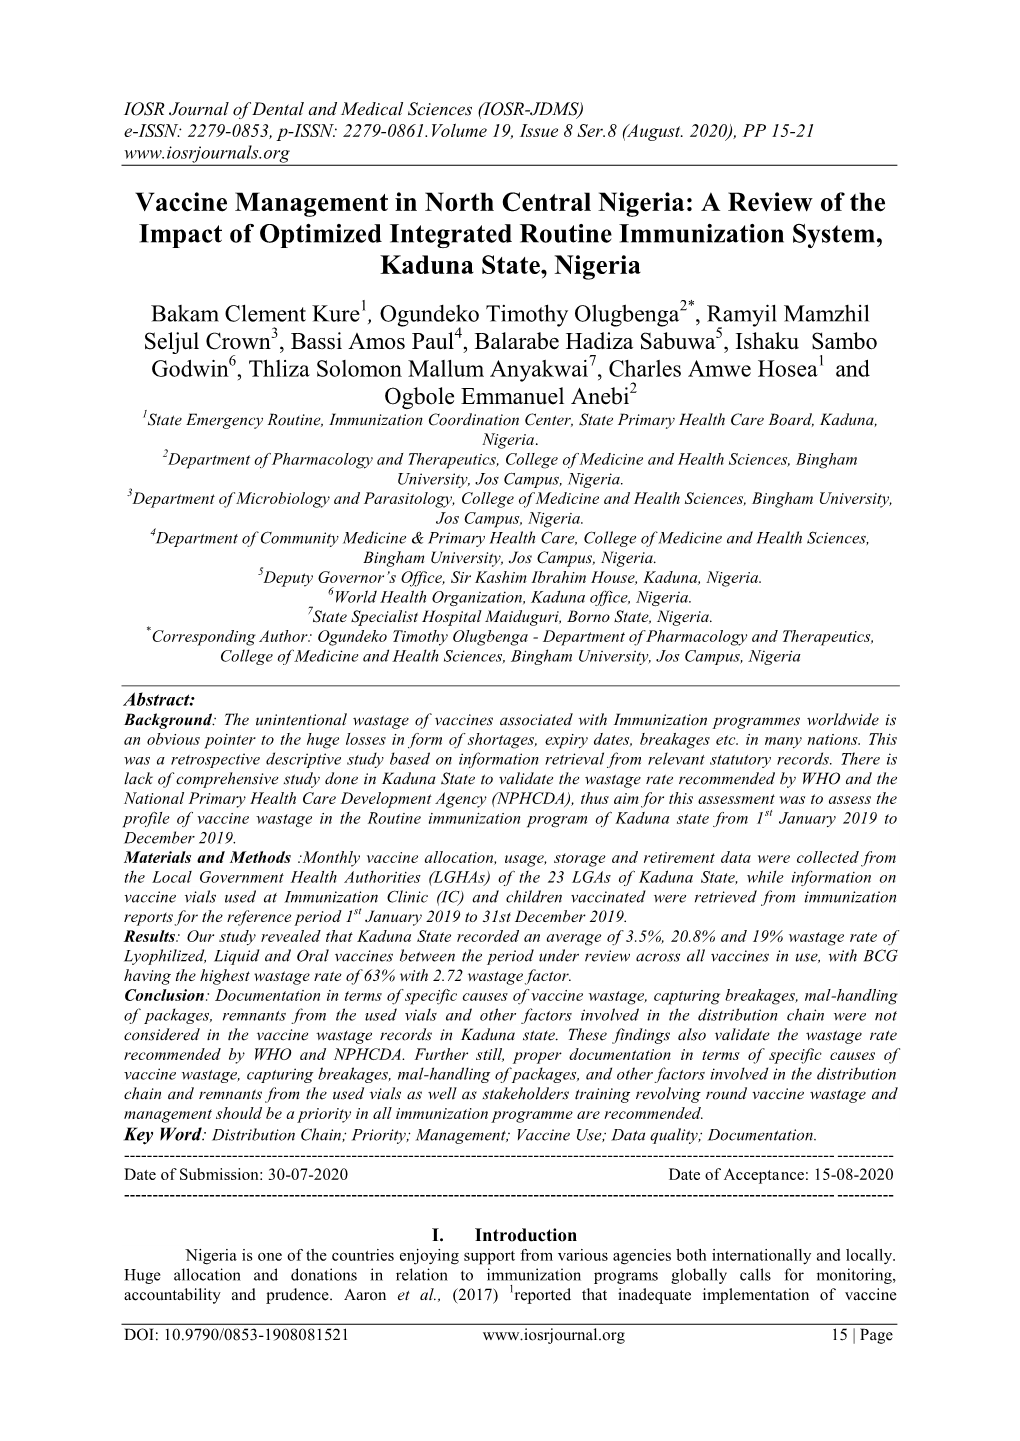 Vaccine Management in North Central Nigeria: a Review of the Impact of Optimized Integrated Routine Immunization System, Kaduna State, Nigeria